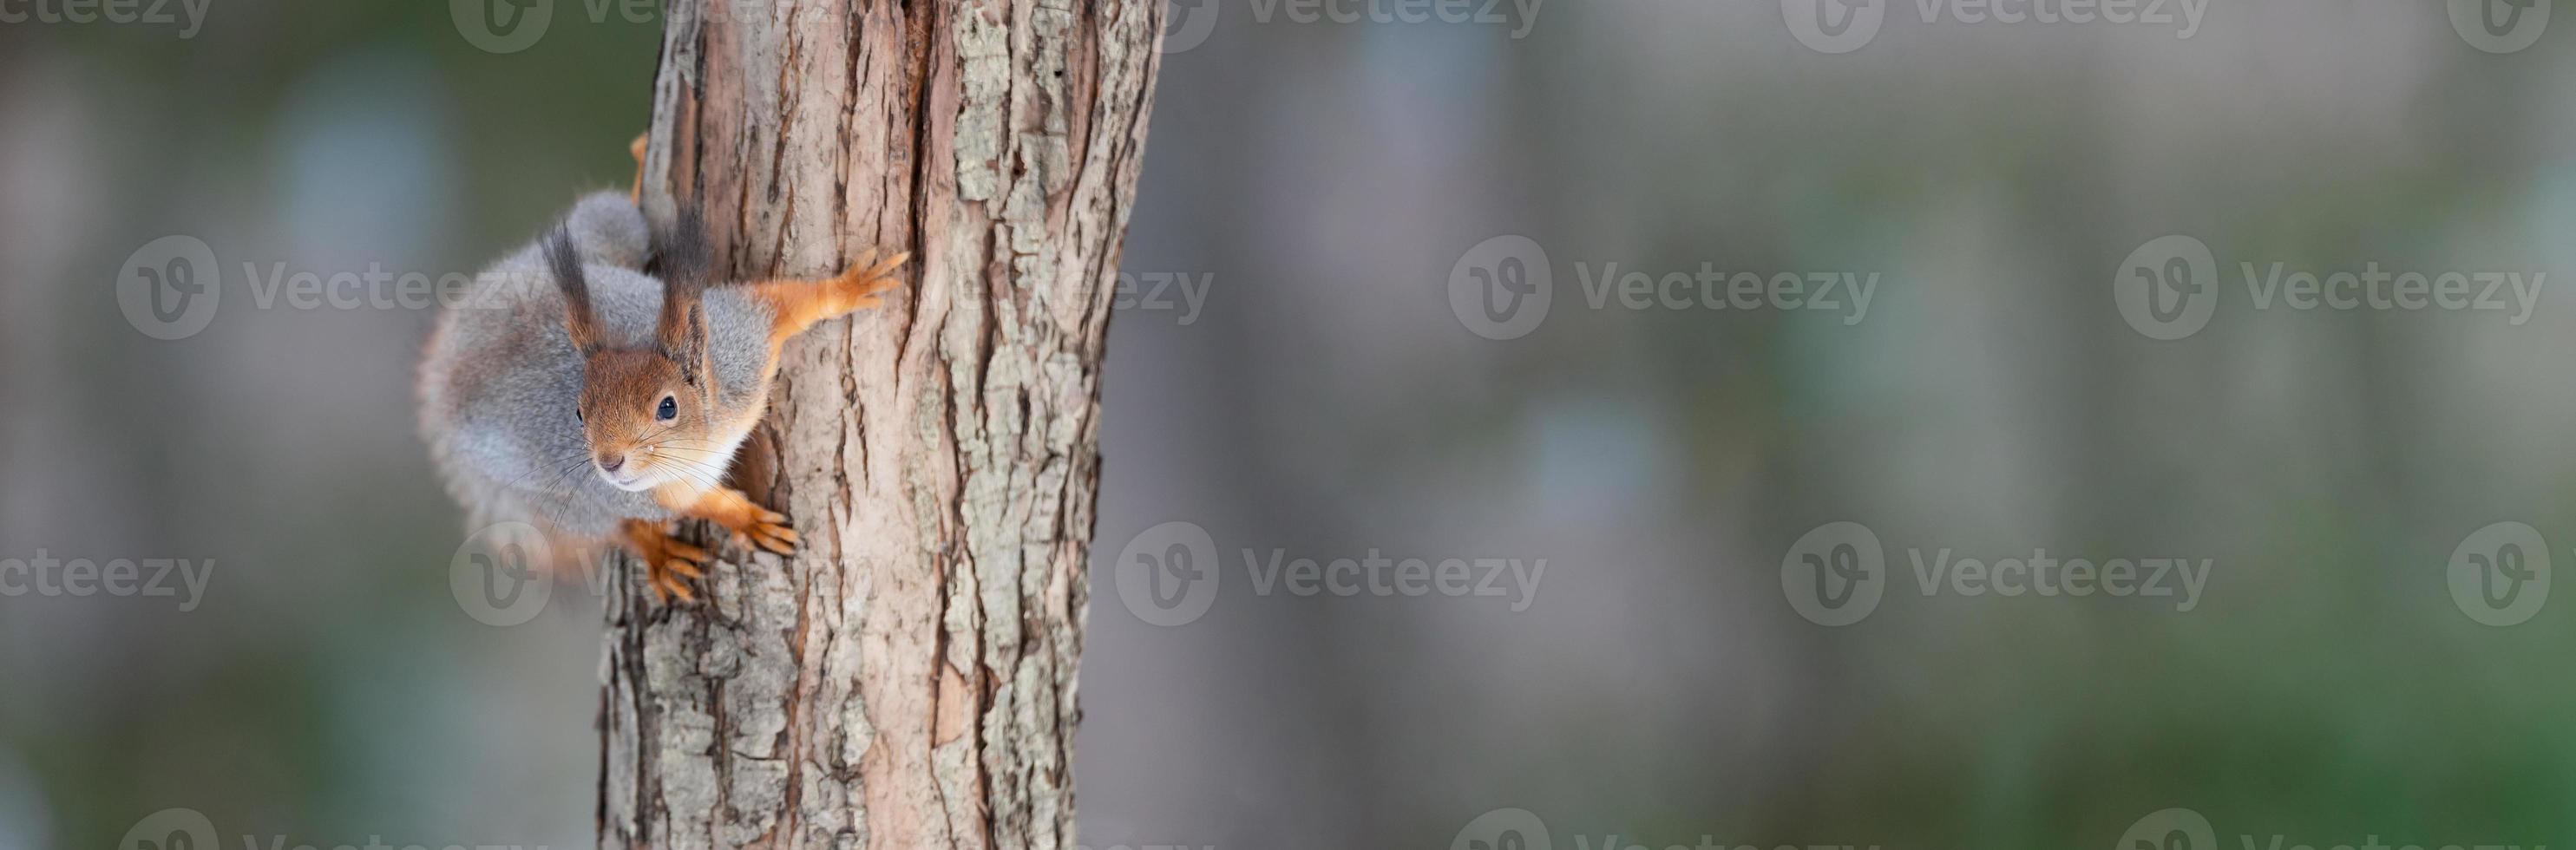 Red squirrel sitting on a tree branch in winter forest and nibbling seeds on snow covered trees background. photo